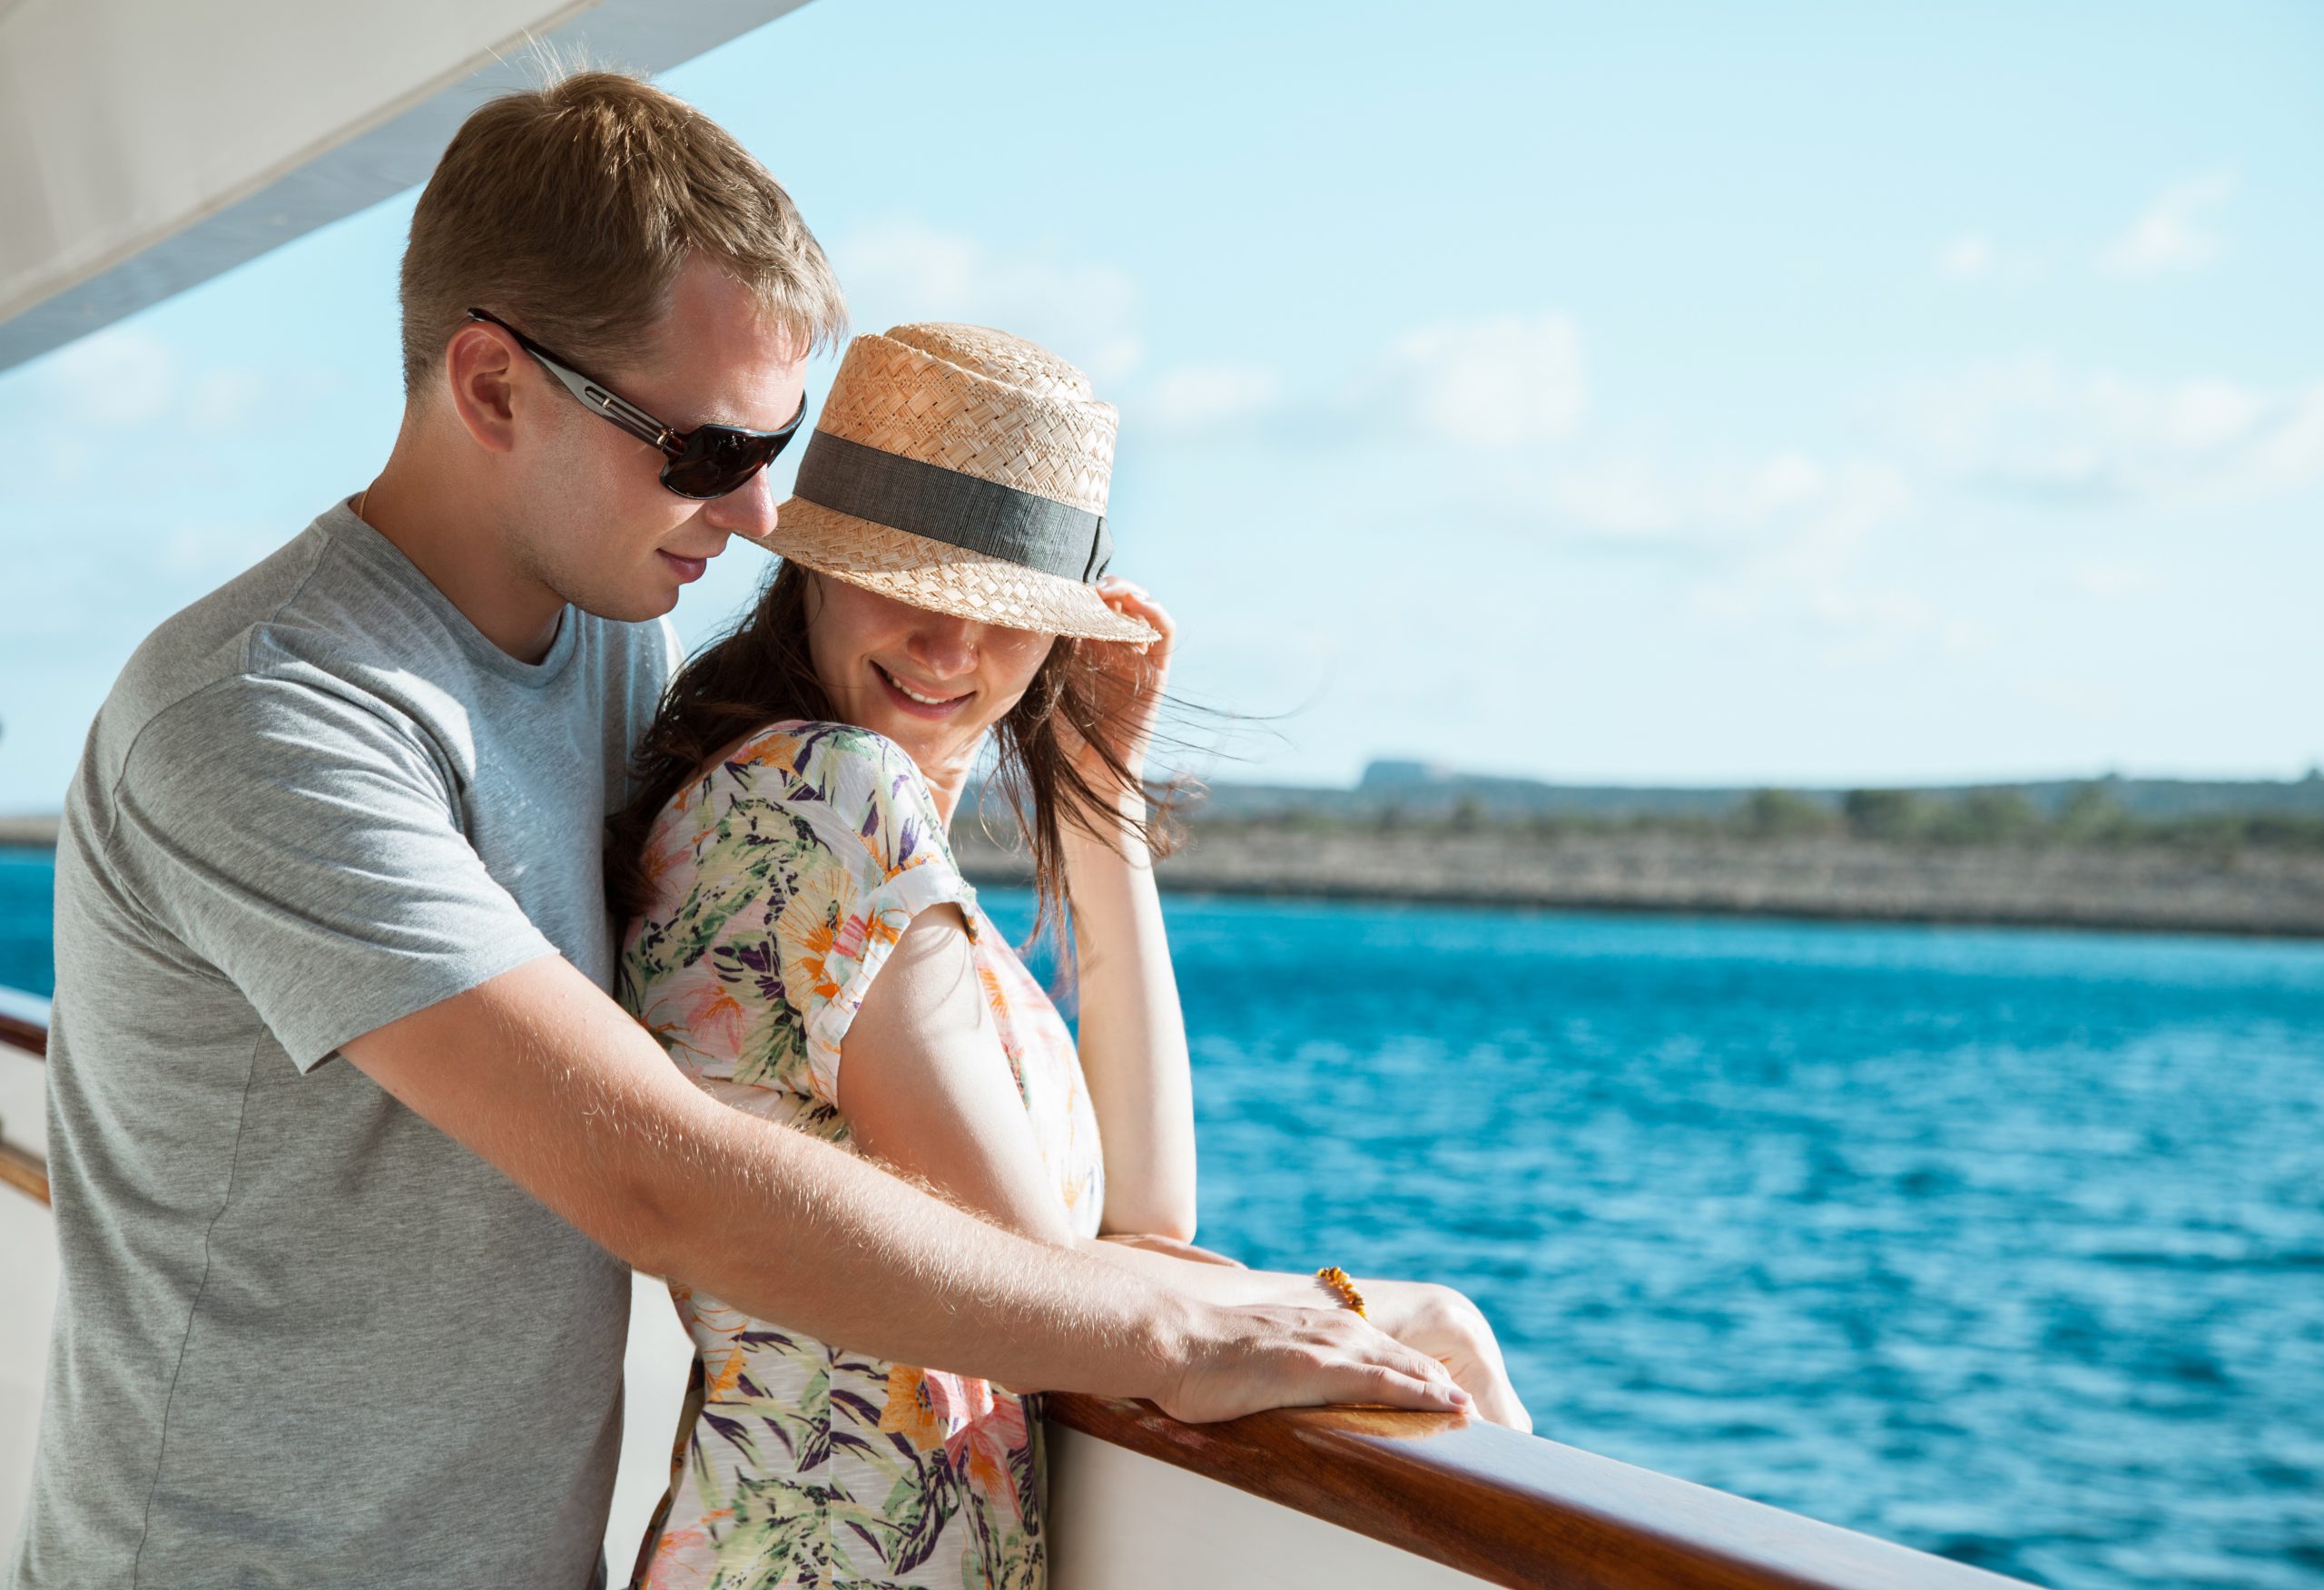 How to find love on a cruise ship